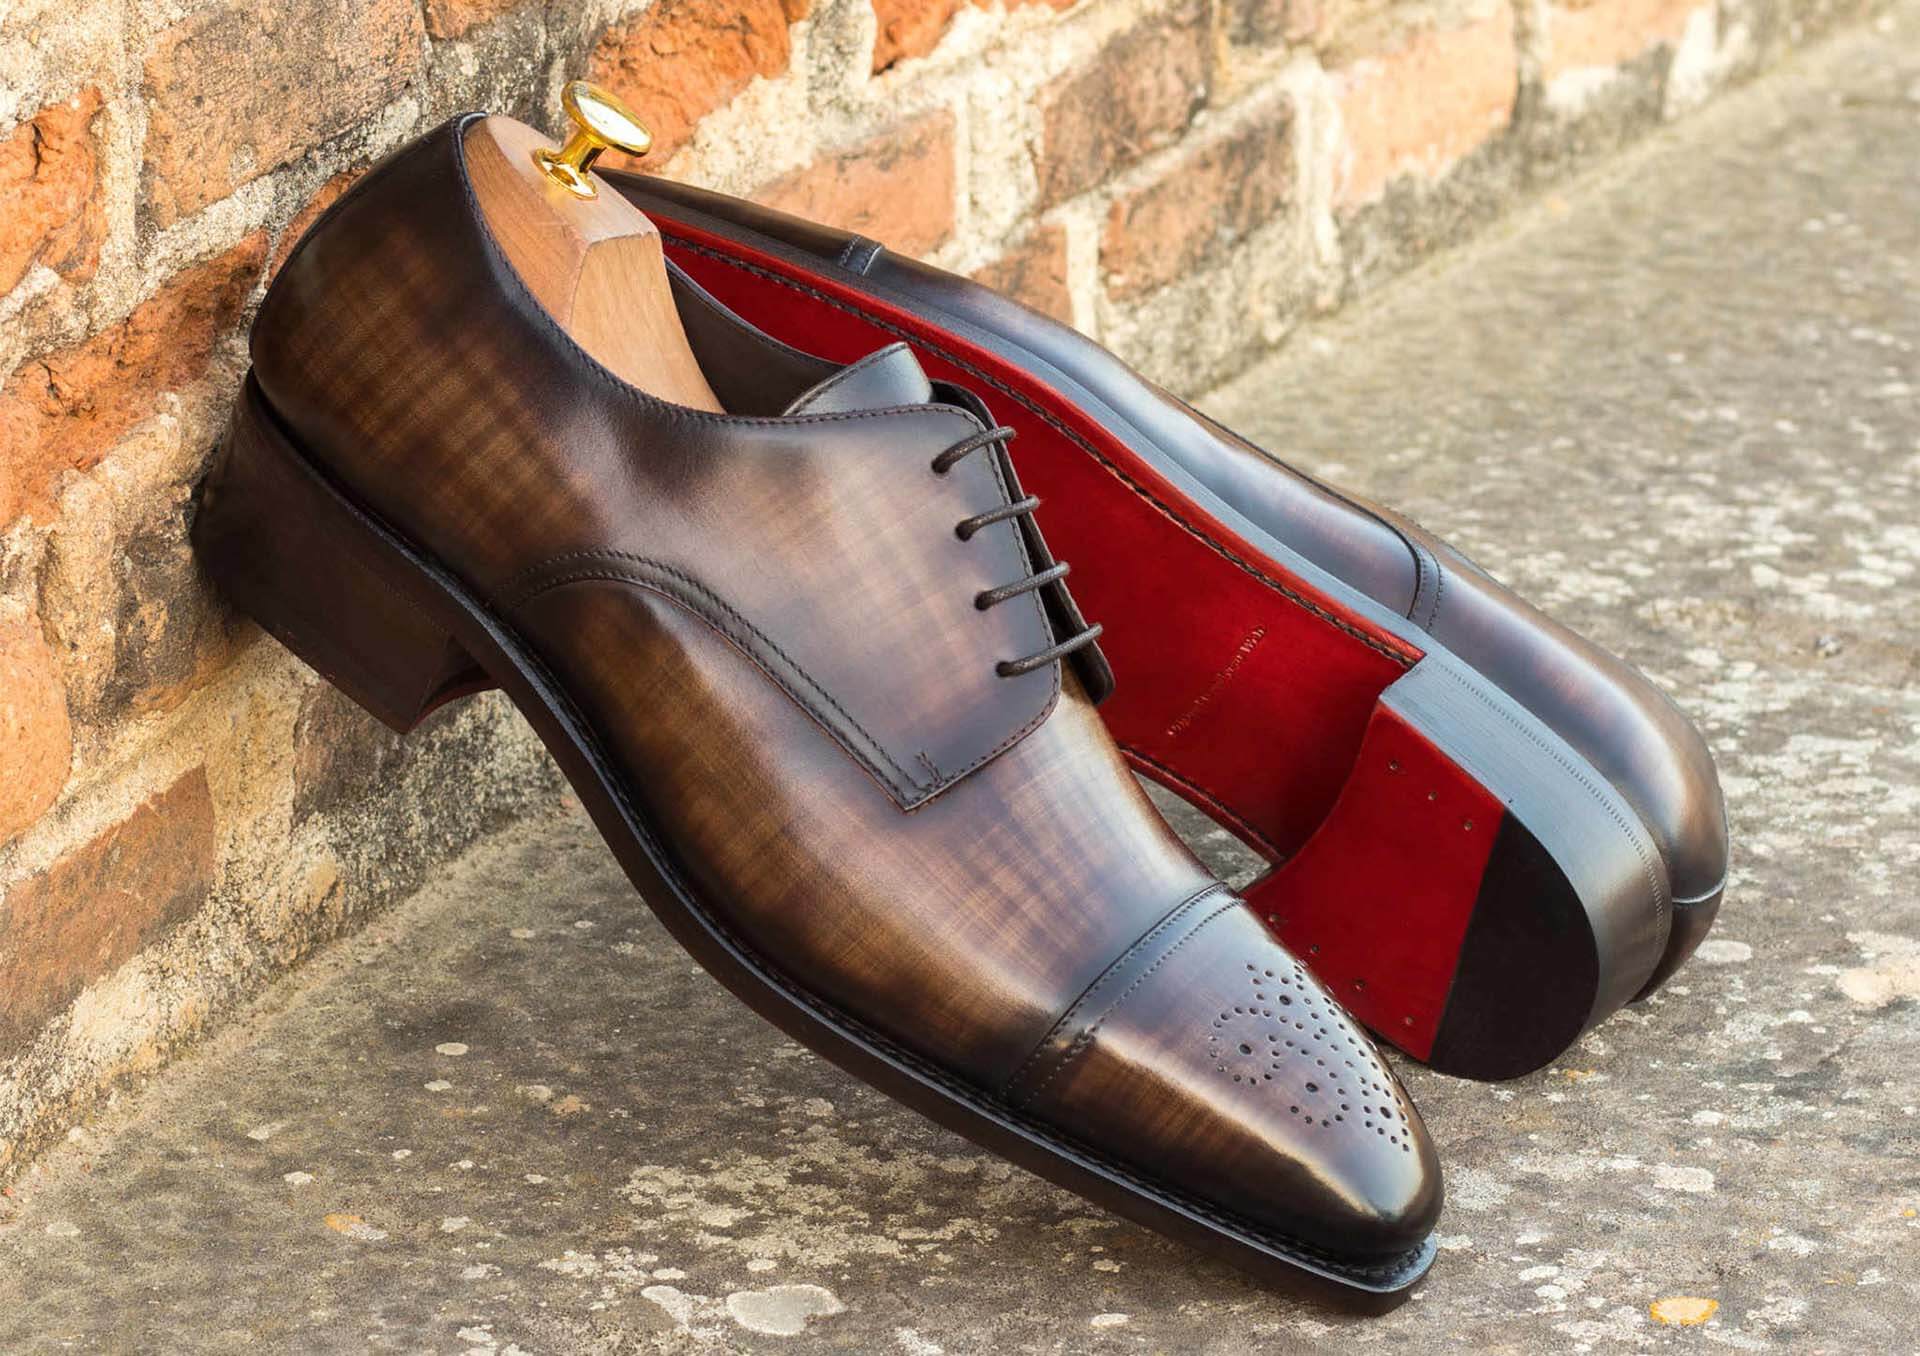 A pair of luxury shoes with polished brown leather and distinctive red soles, indicative of high-end craftsmanship, resting against a brick wall, portraying a blend of elegance and urban style.